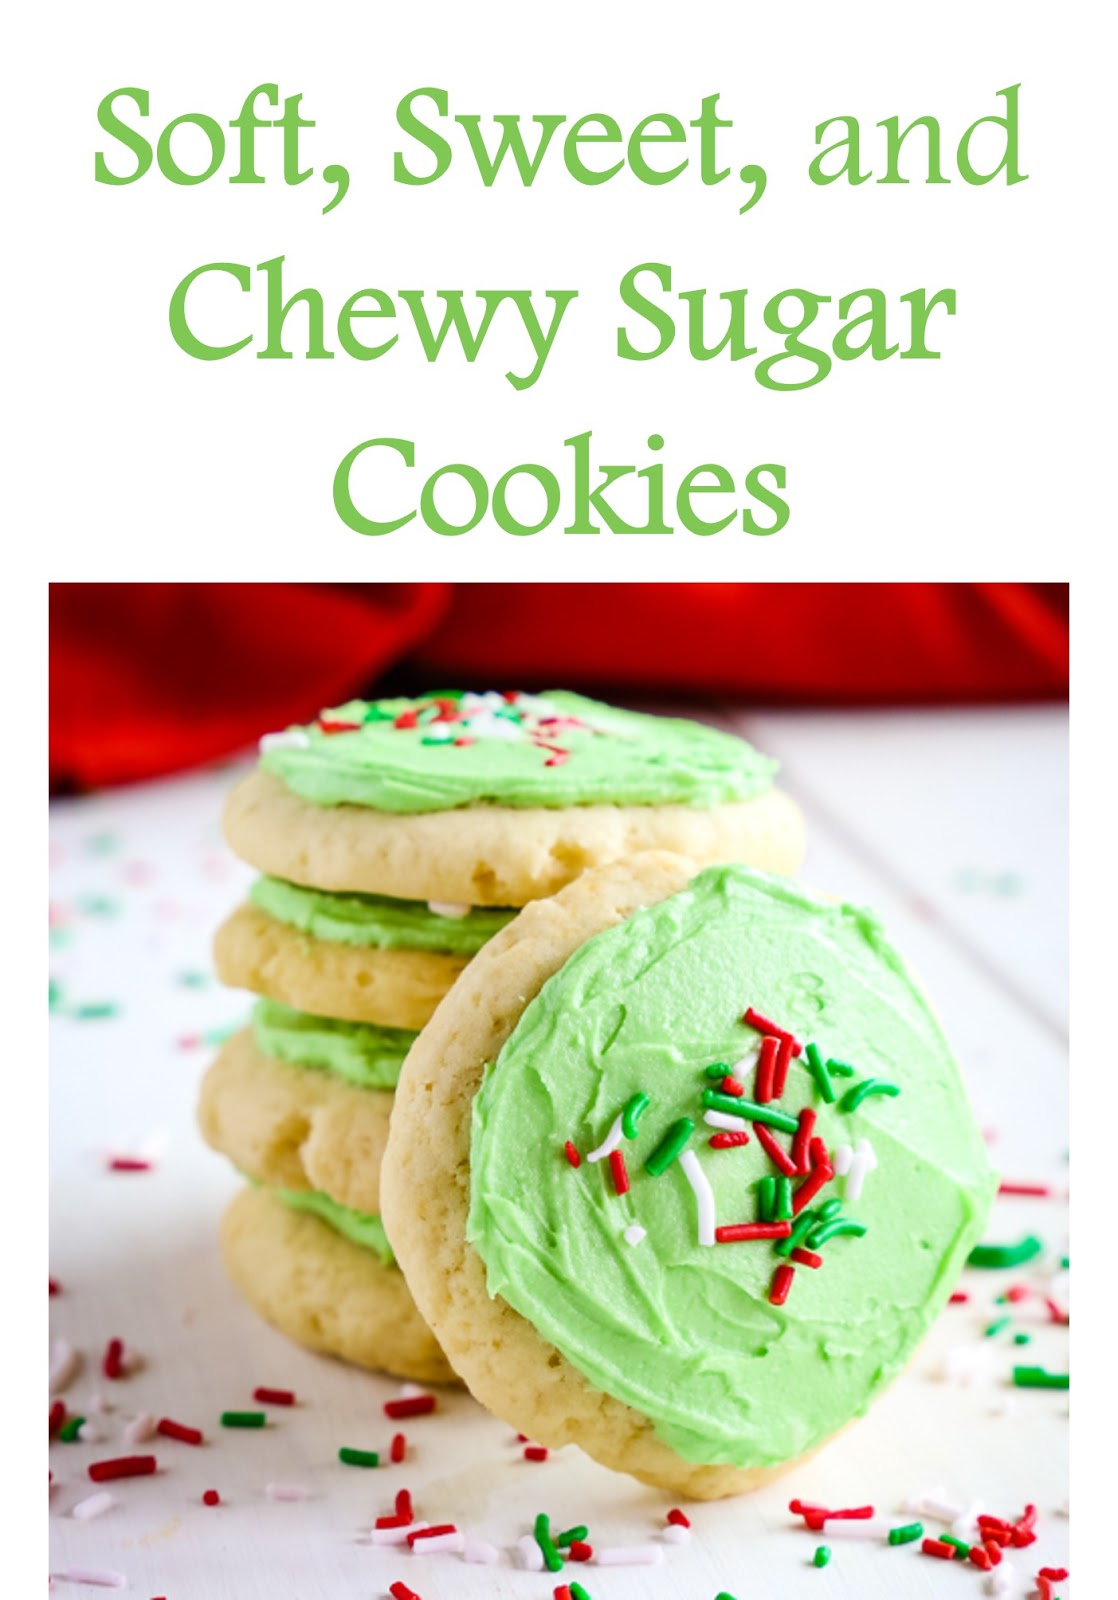 811 Reviews: My BEST #Recipes >> Soft, Sweet, and Chewy Sugar #Cookies - .